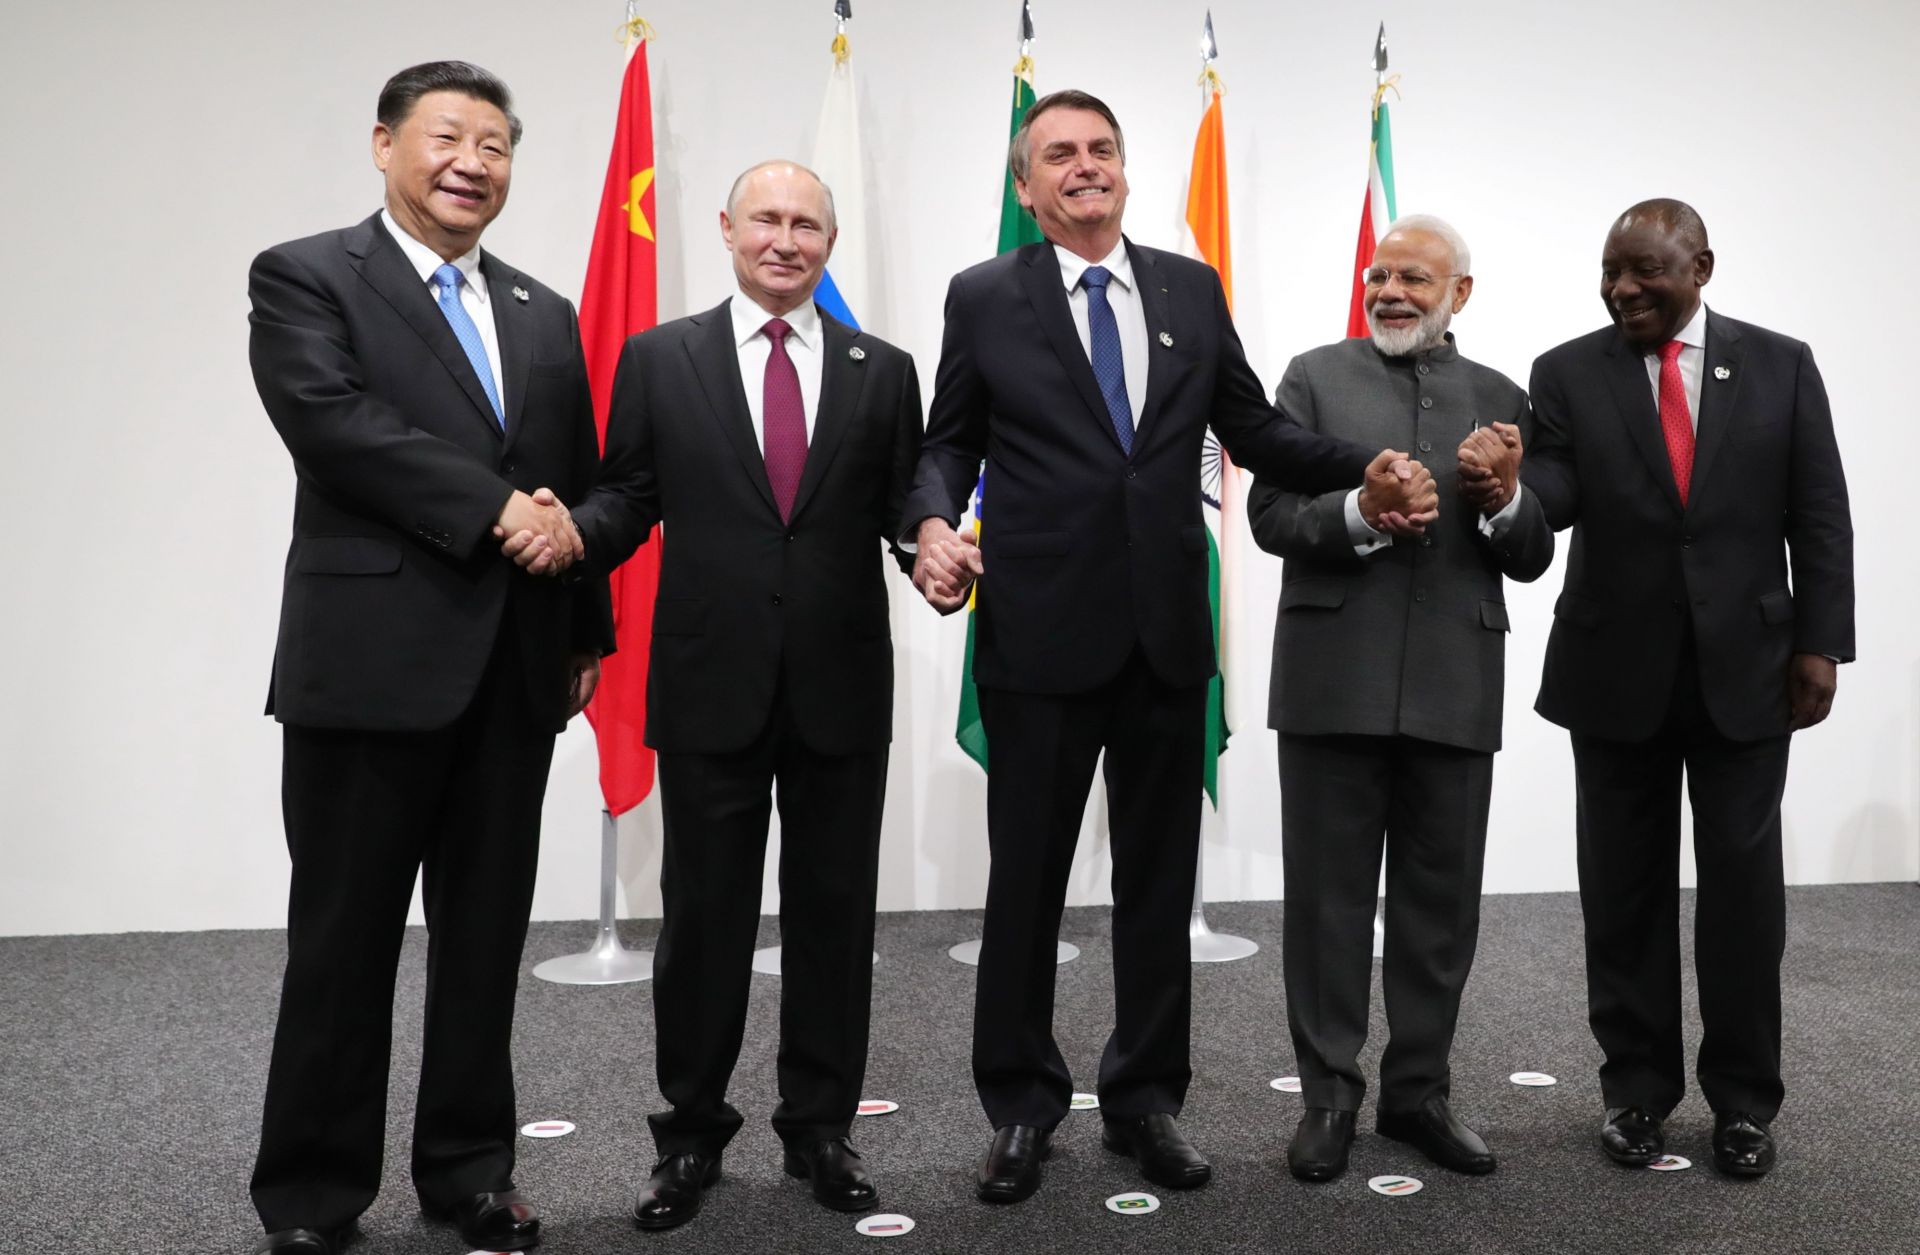 (From left) Chinese President Xi Jinping, Russian President Vladimir Putin, then-Brazilian President Jair Bolsonaro, Indian Prime Minister Narendra Modi and South African President Cyril Ramaphosa pose for a photo during the G-20 summit in Osaka, Japan, on June 28, 2019. 